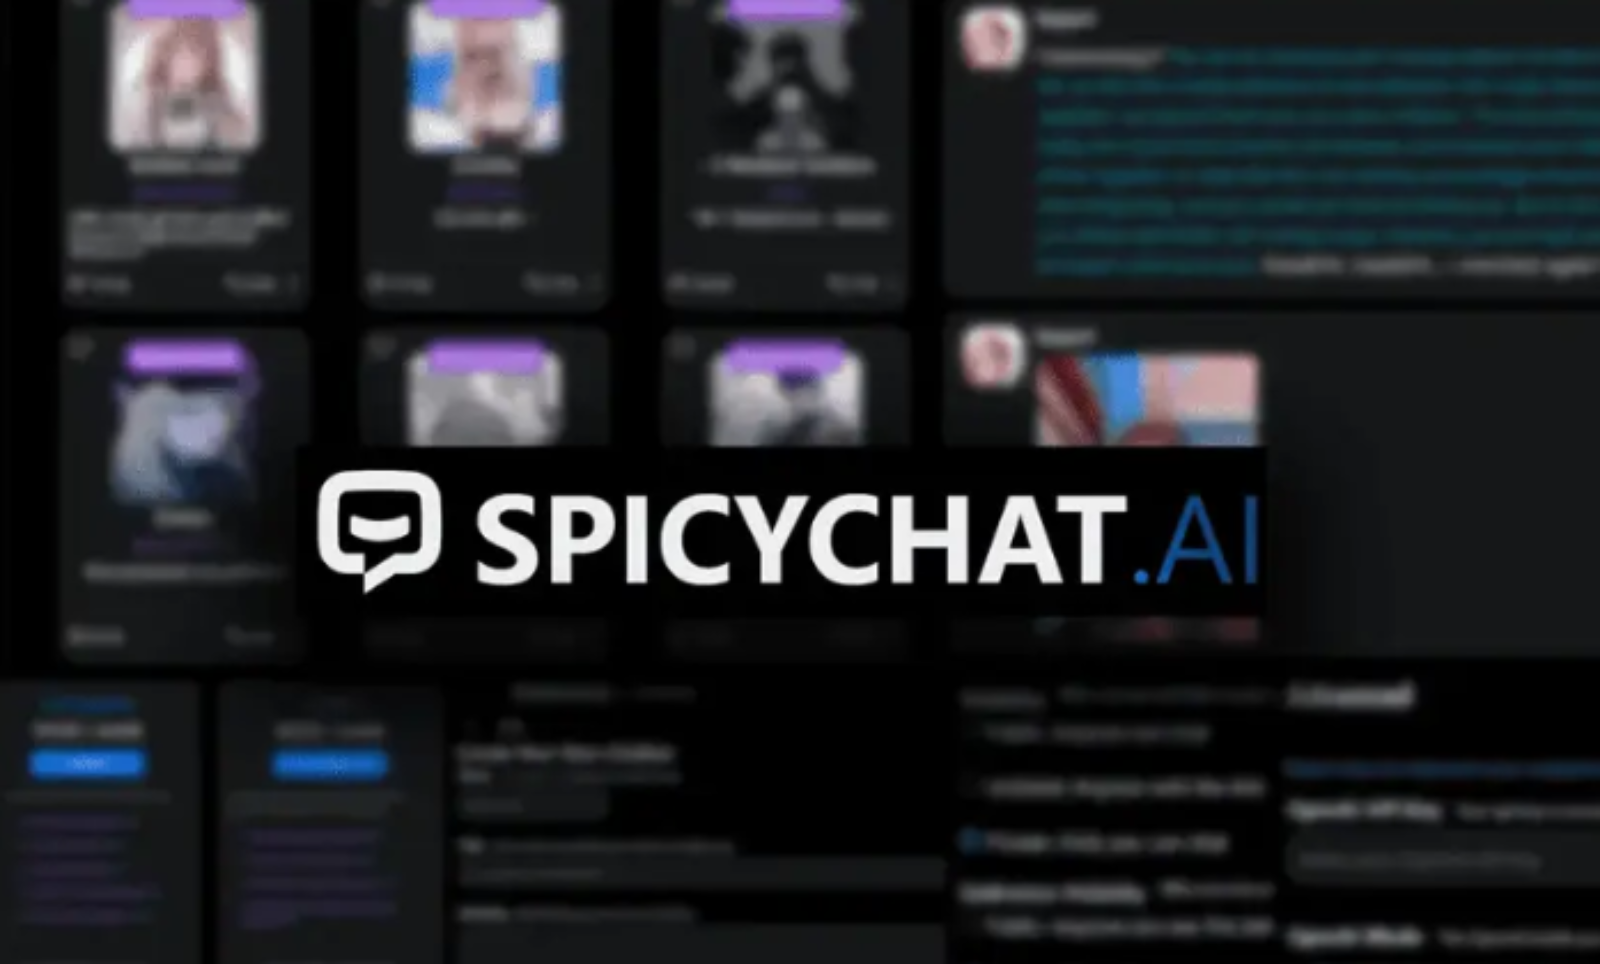 SpicyChat AI: Does It Really Fulfill Your Inner Fantasies Through AI Roleplay?